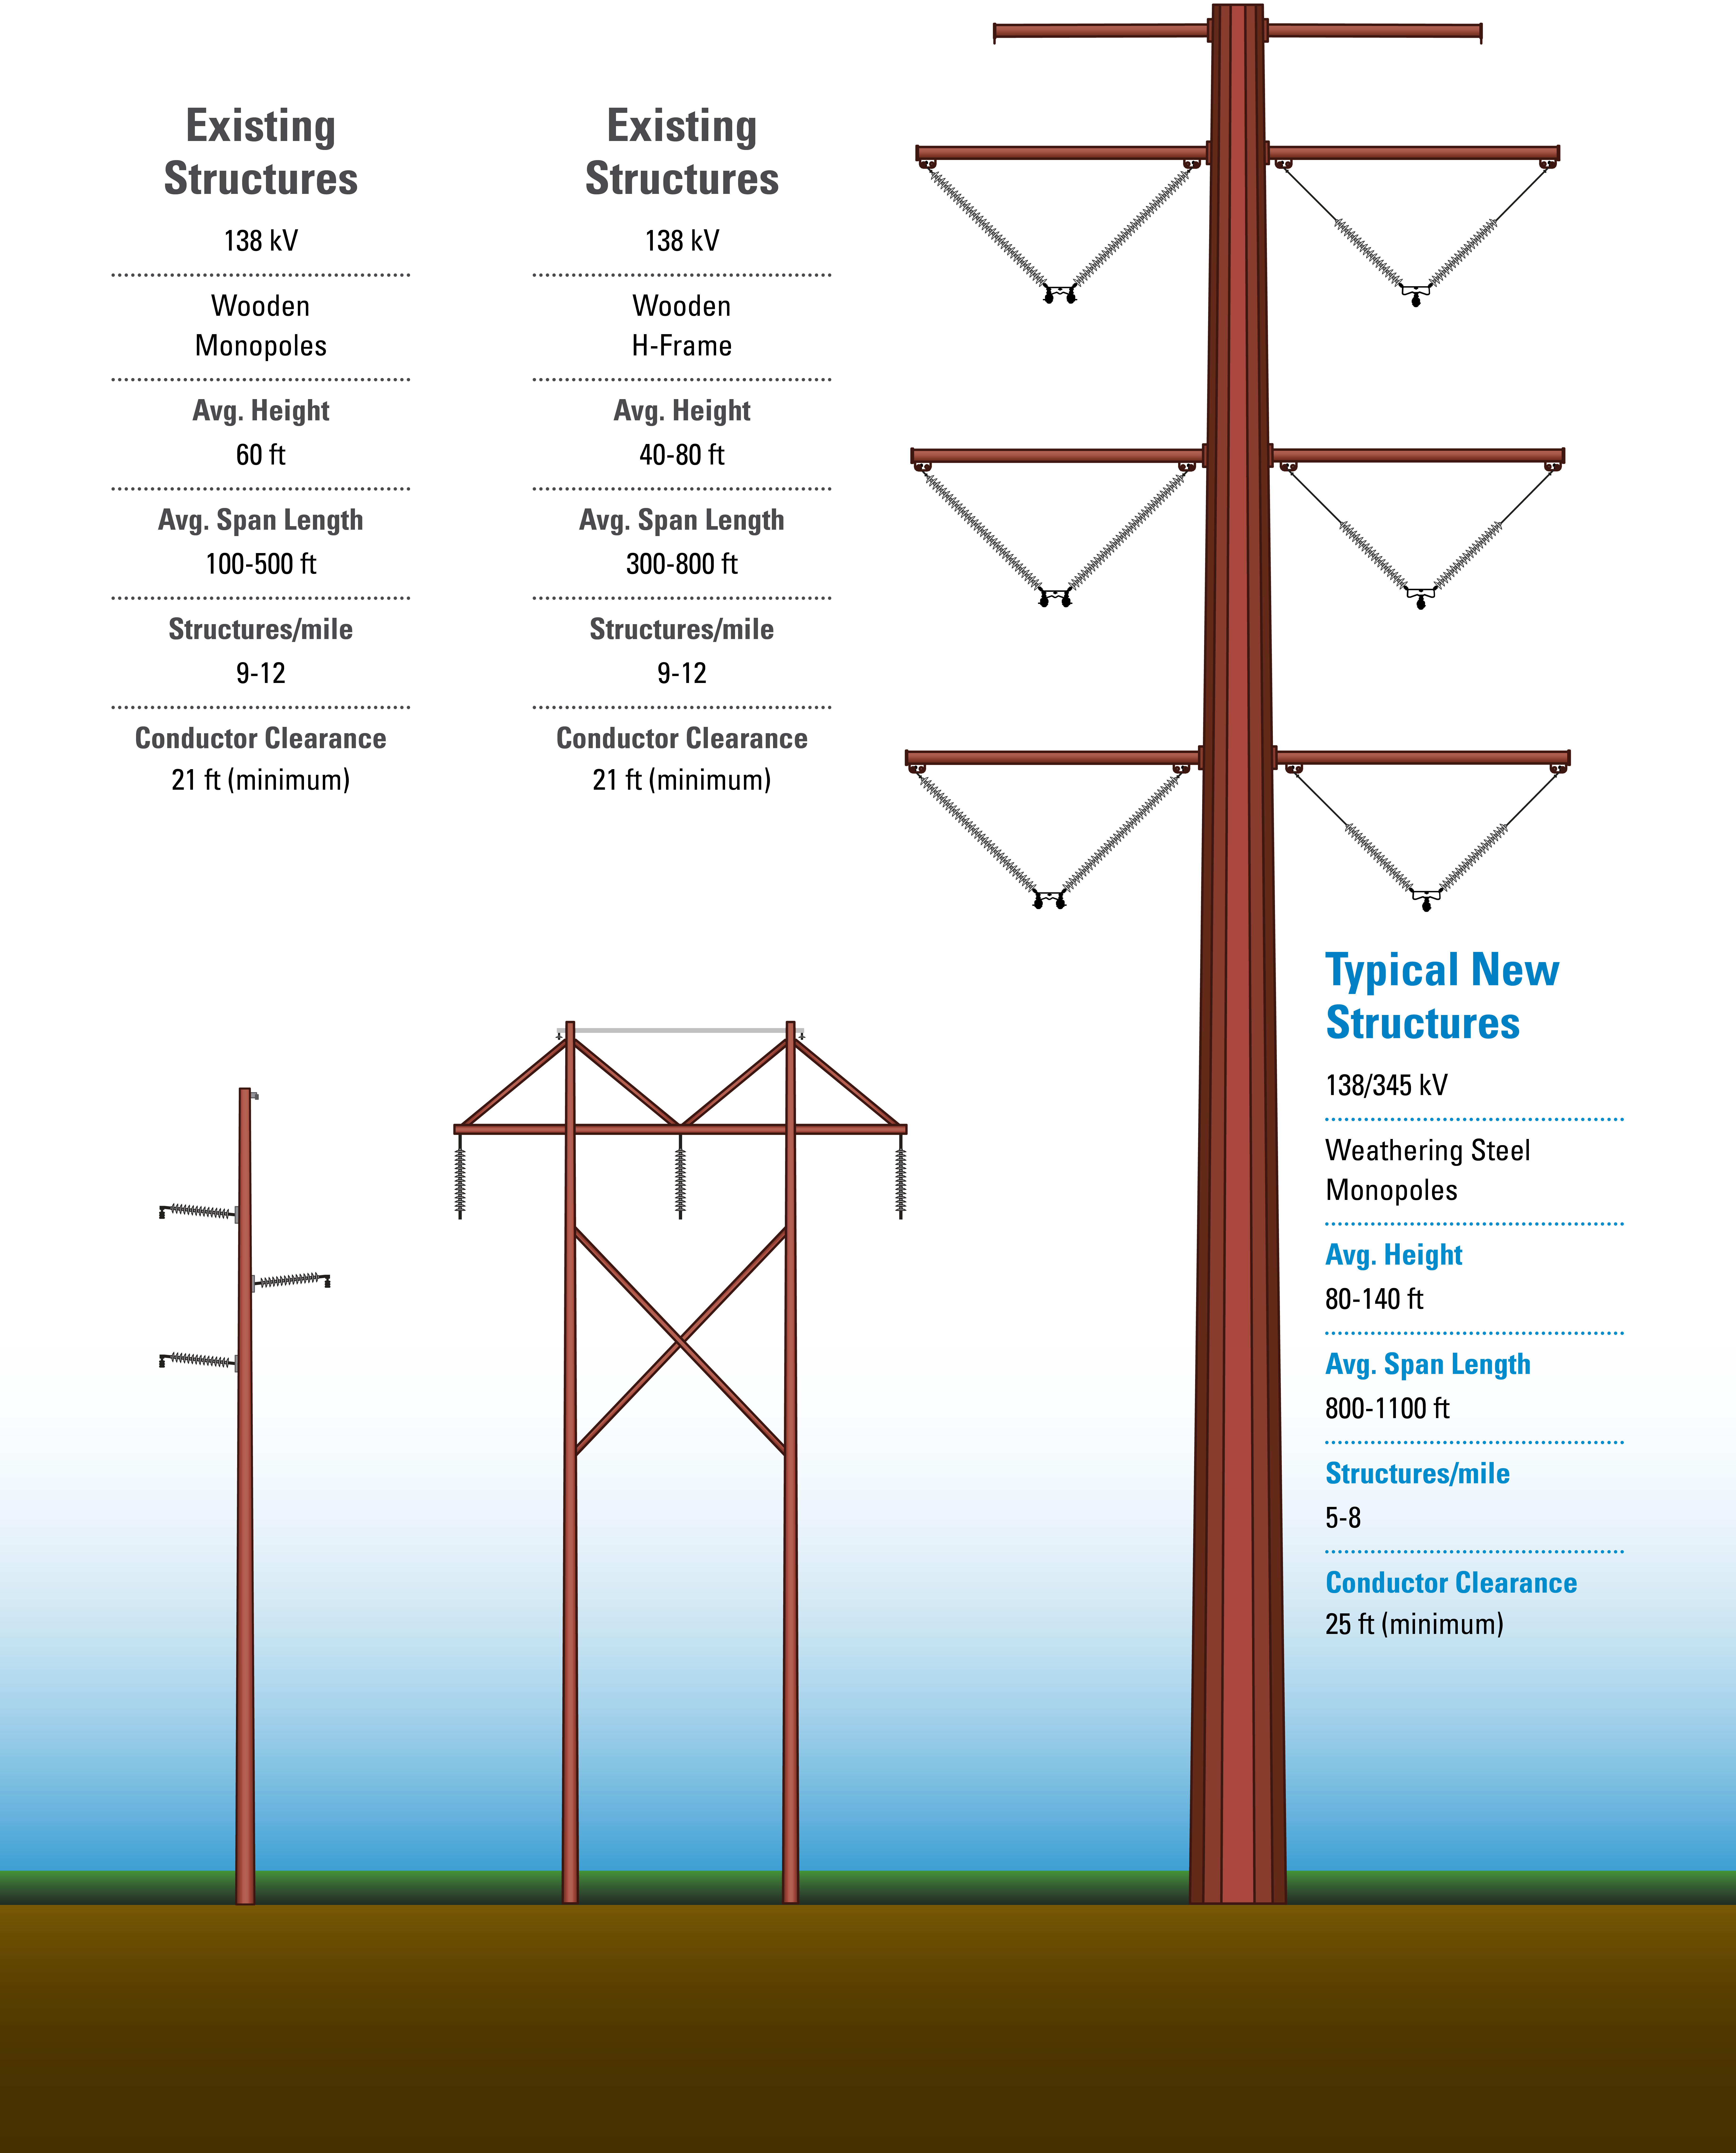 Three side by side structure graphics showing the existing structures and anticipated new structures for the county. Graphics are intended for information purposes only and are not to scale. New structure designs, including number of arms and type of foundation may vary depending on final route, soil conditions, circuit design, and presence of distribution.
                                                  Graphic 1 shows the existing 138 kV wooden monopole, with an average height of 60ft and average span length between 100-500ft. Structures per mile averages between 9-12 miles with a conductor clearance of 21ft minimum. 
                                                  
                                                  Graphic 2 shows the existing 138 kV wooden H-frame, with an average height of 40-80ft and average span length between 300-800ft. Structures per mile averages between 9-12 miles with a conductor clearance of 21ft minimum. 
                                                  
                                                  Graphic 3 shows the anticipated new structure as a 138/345 kV weathering steel monopole with an average height of 80-140ft and average span length between 800-1100 ft. Structures per mile averages between 5-8 miles with a conductor clearance of 25ft minimum.